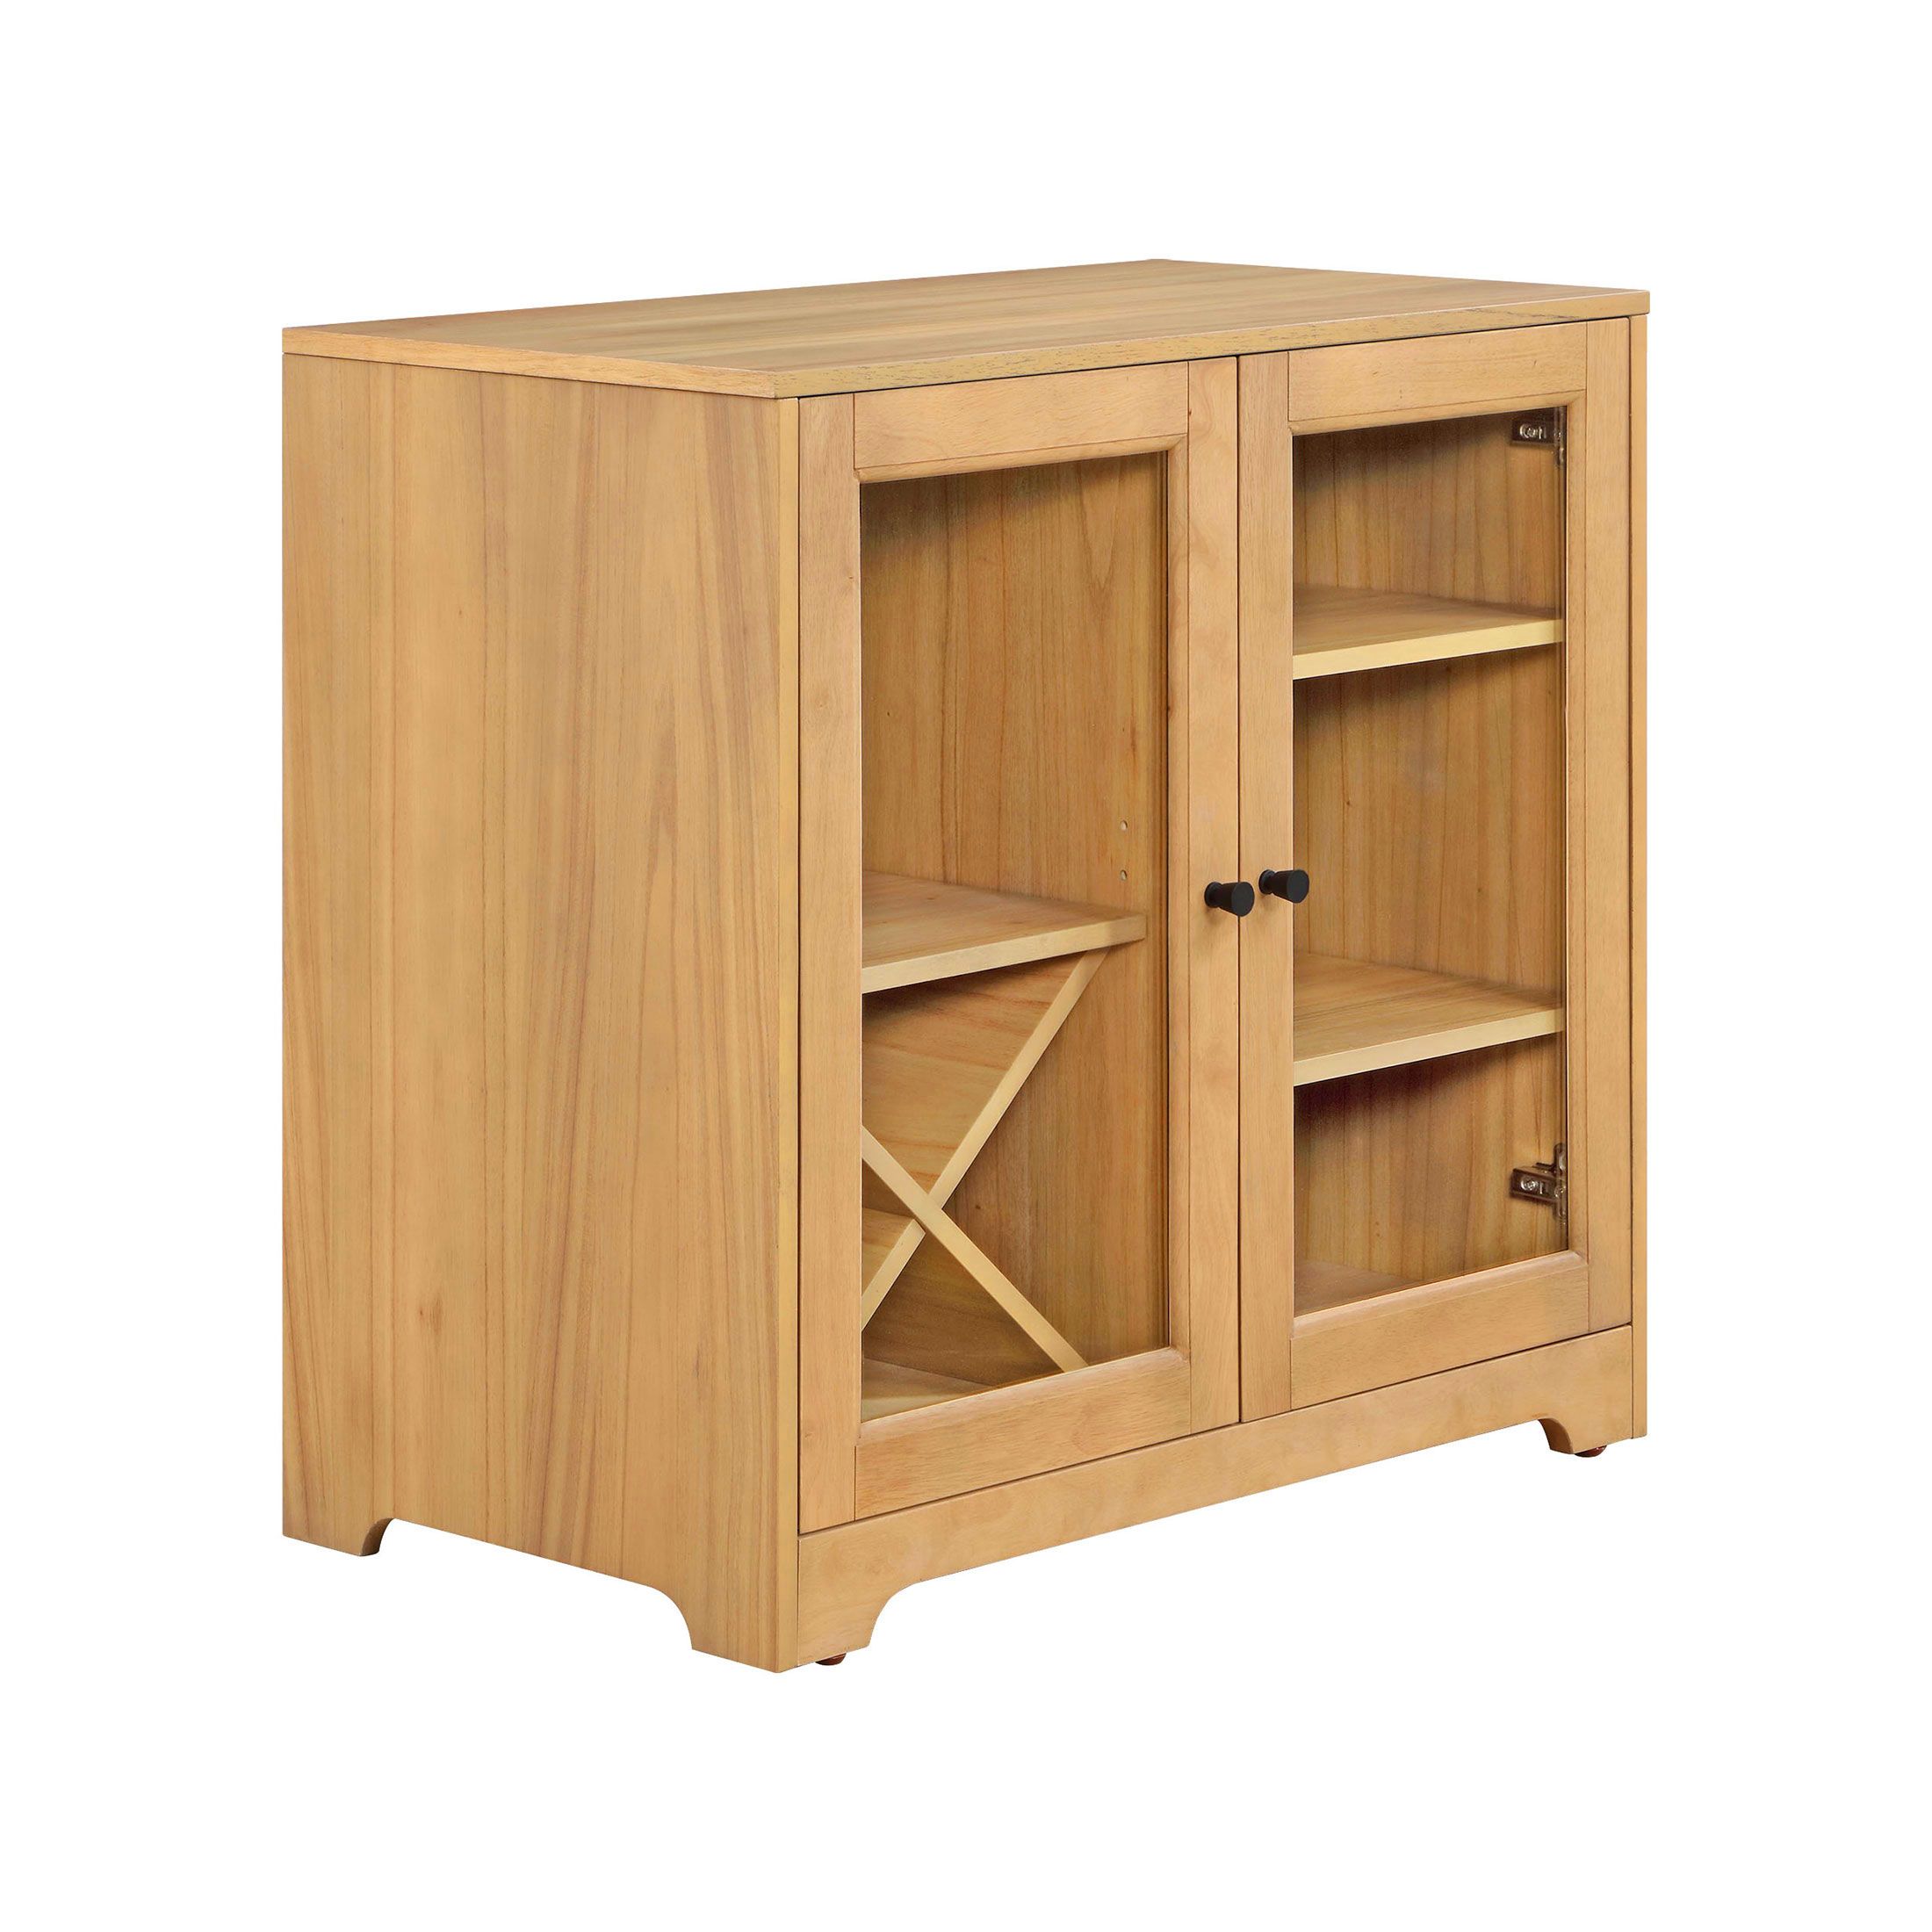 Better Homes & Gardens Aster Bar Cabinet with Solid Wood Frame, Natural Oak finish, by Dave & Jen... | Walmart (US)